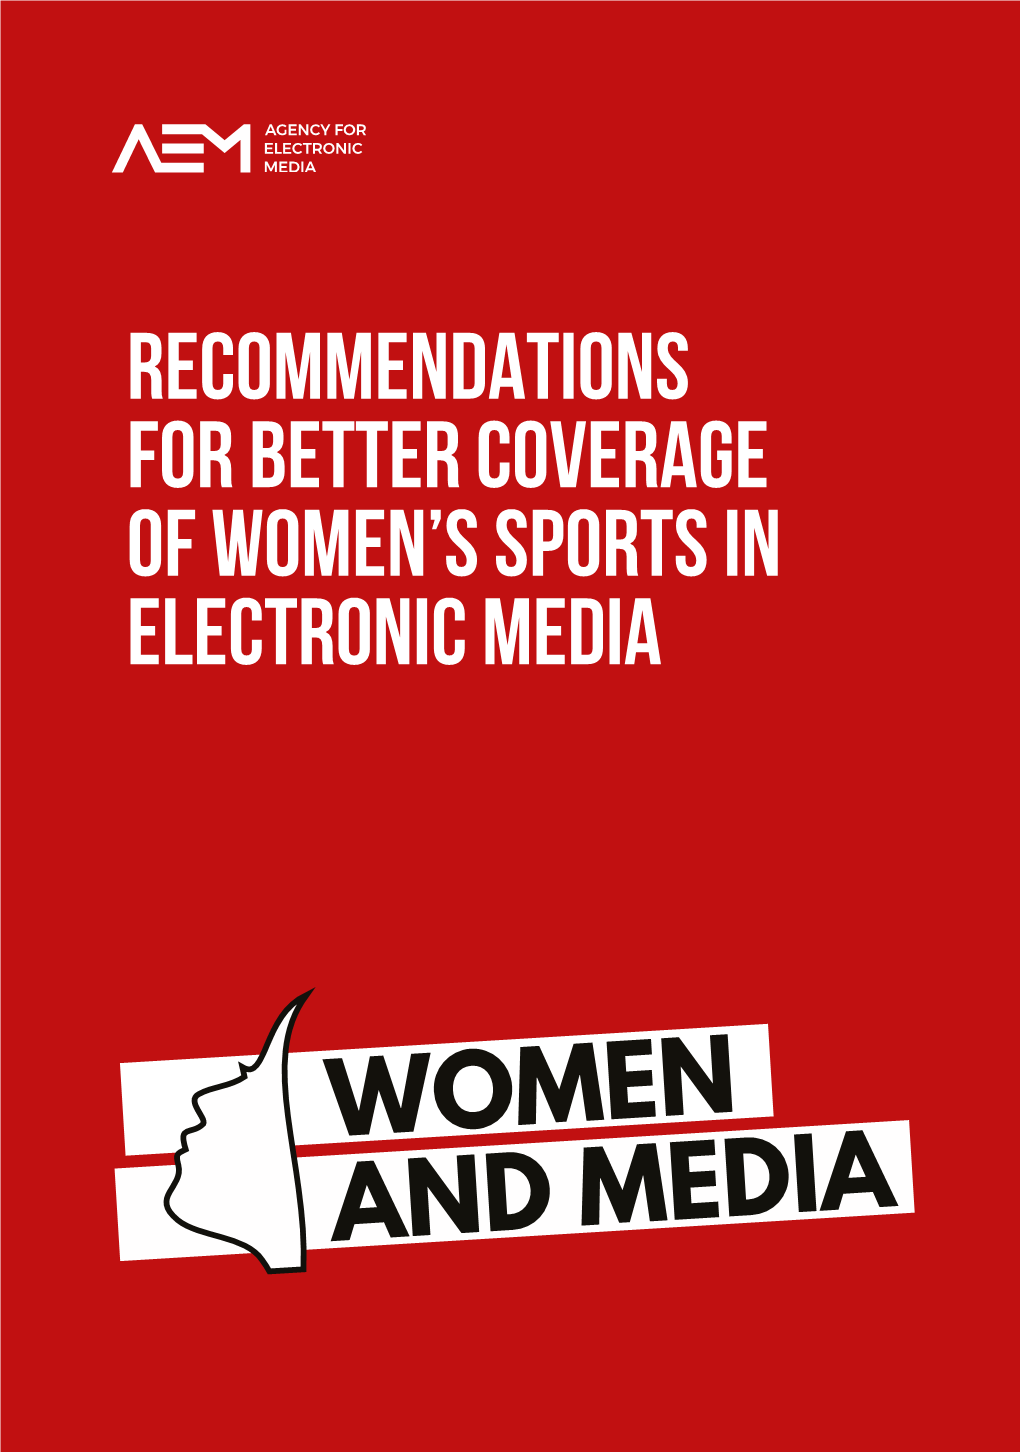 Recommendations for Better Coverage of Women's Sports in Electronic Media